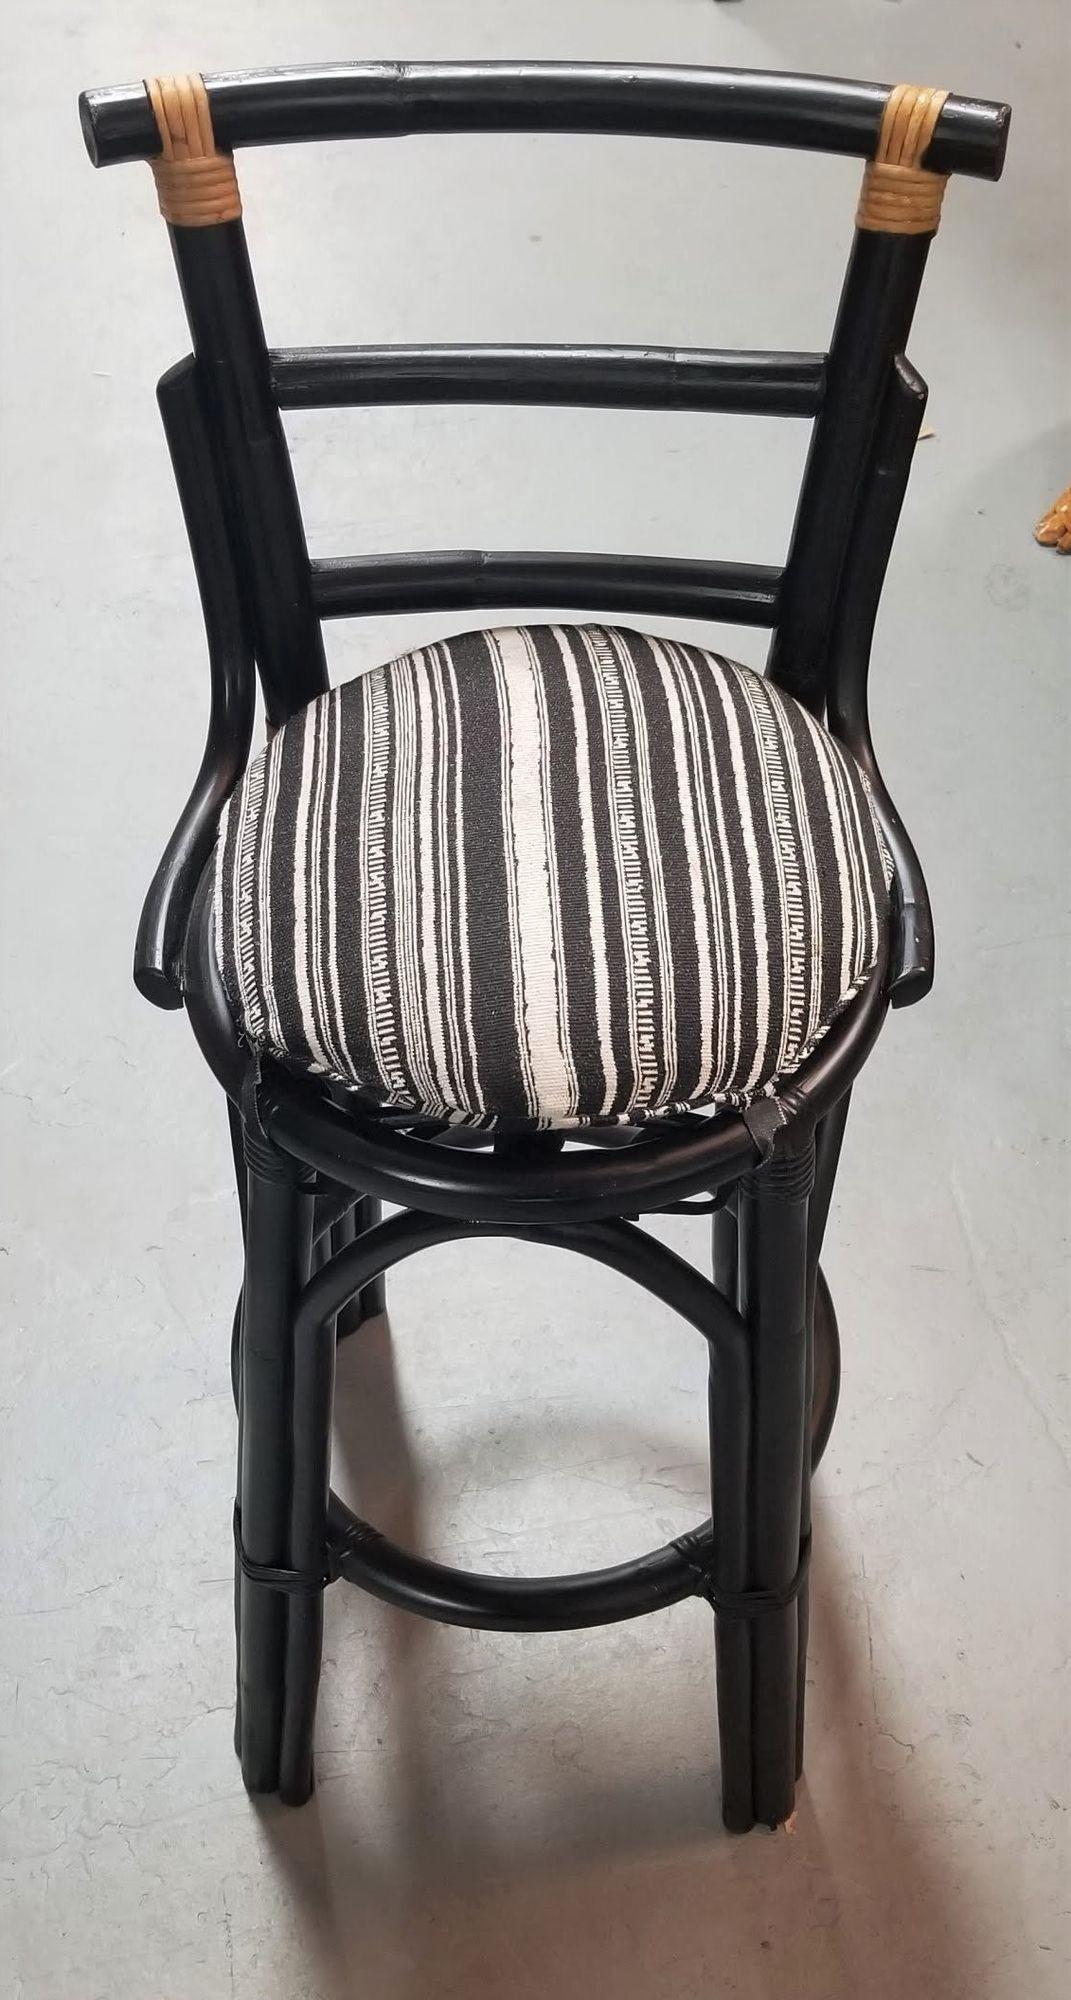 Pair of 2 rattan bar stools painted black with natural wrappings and original stripped seats. Perfect for your home bar or counter. In the style of John Wisner Design.

Seat Height 29